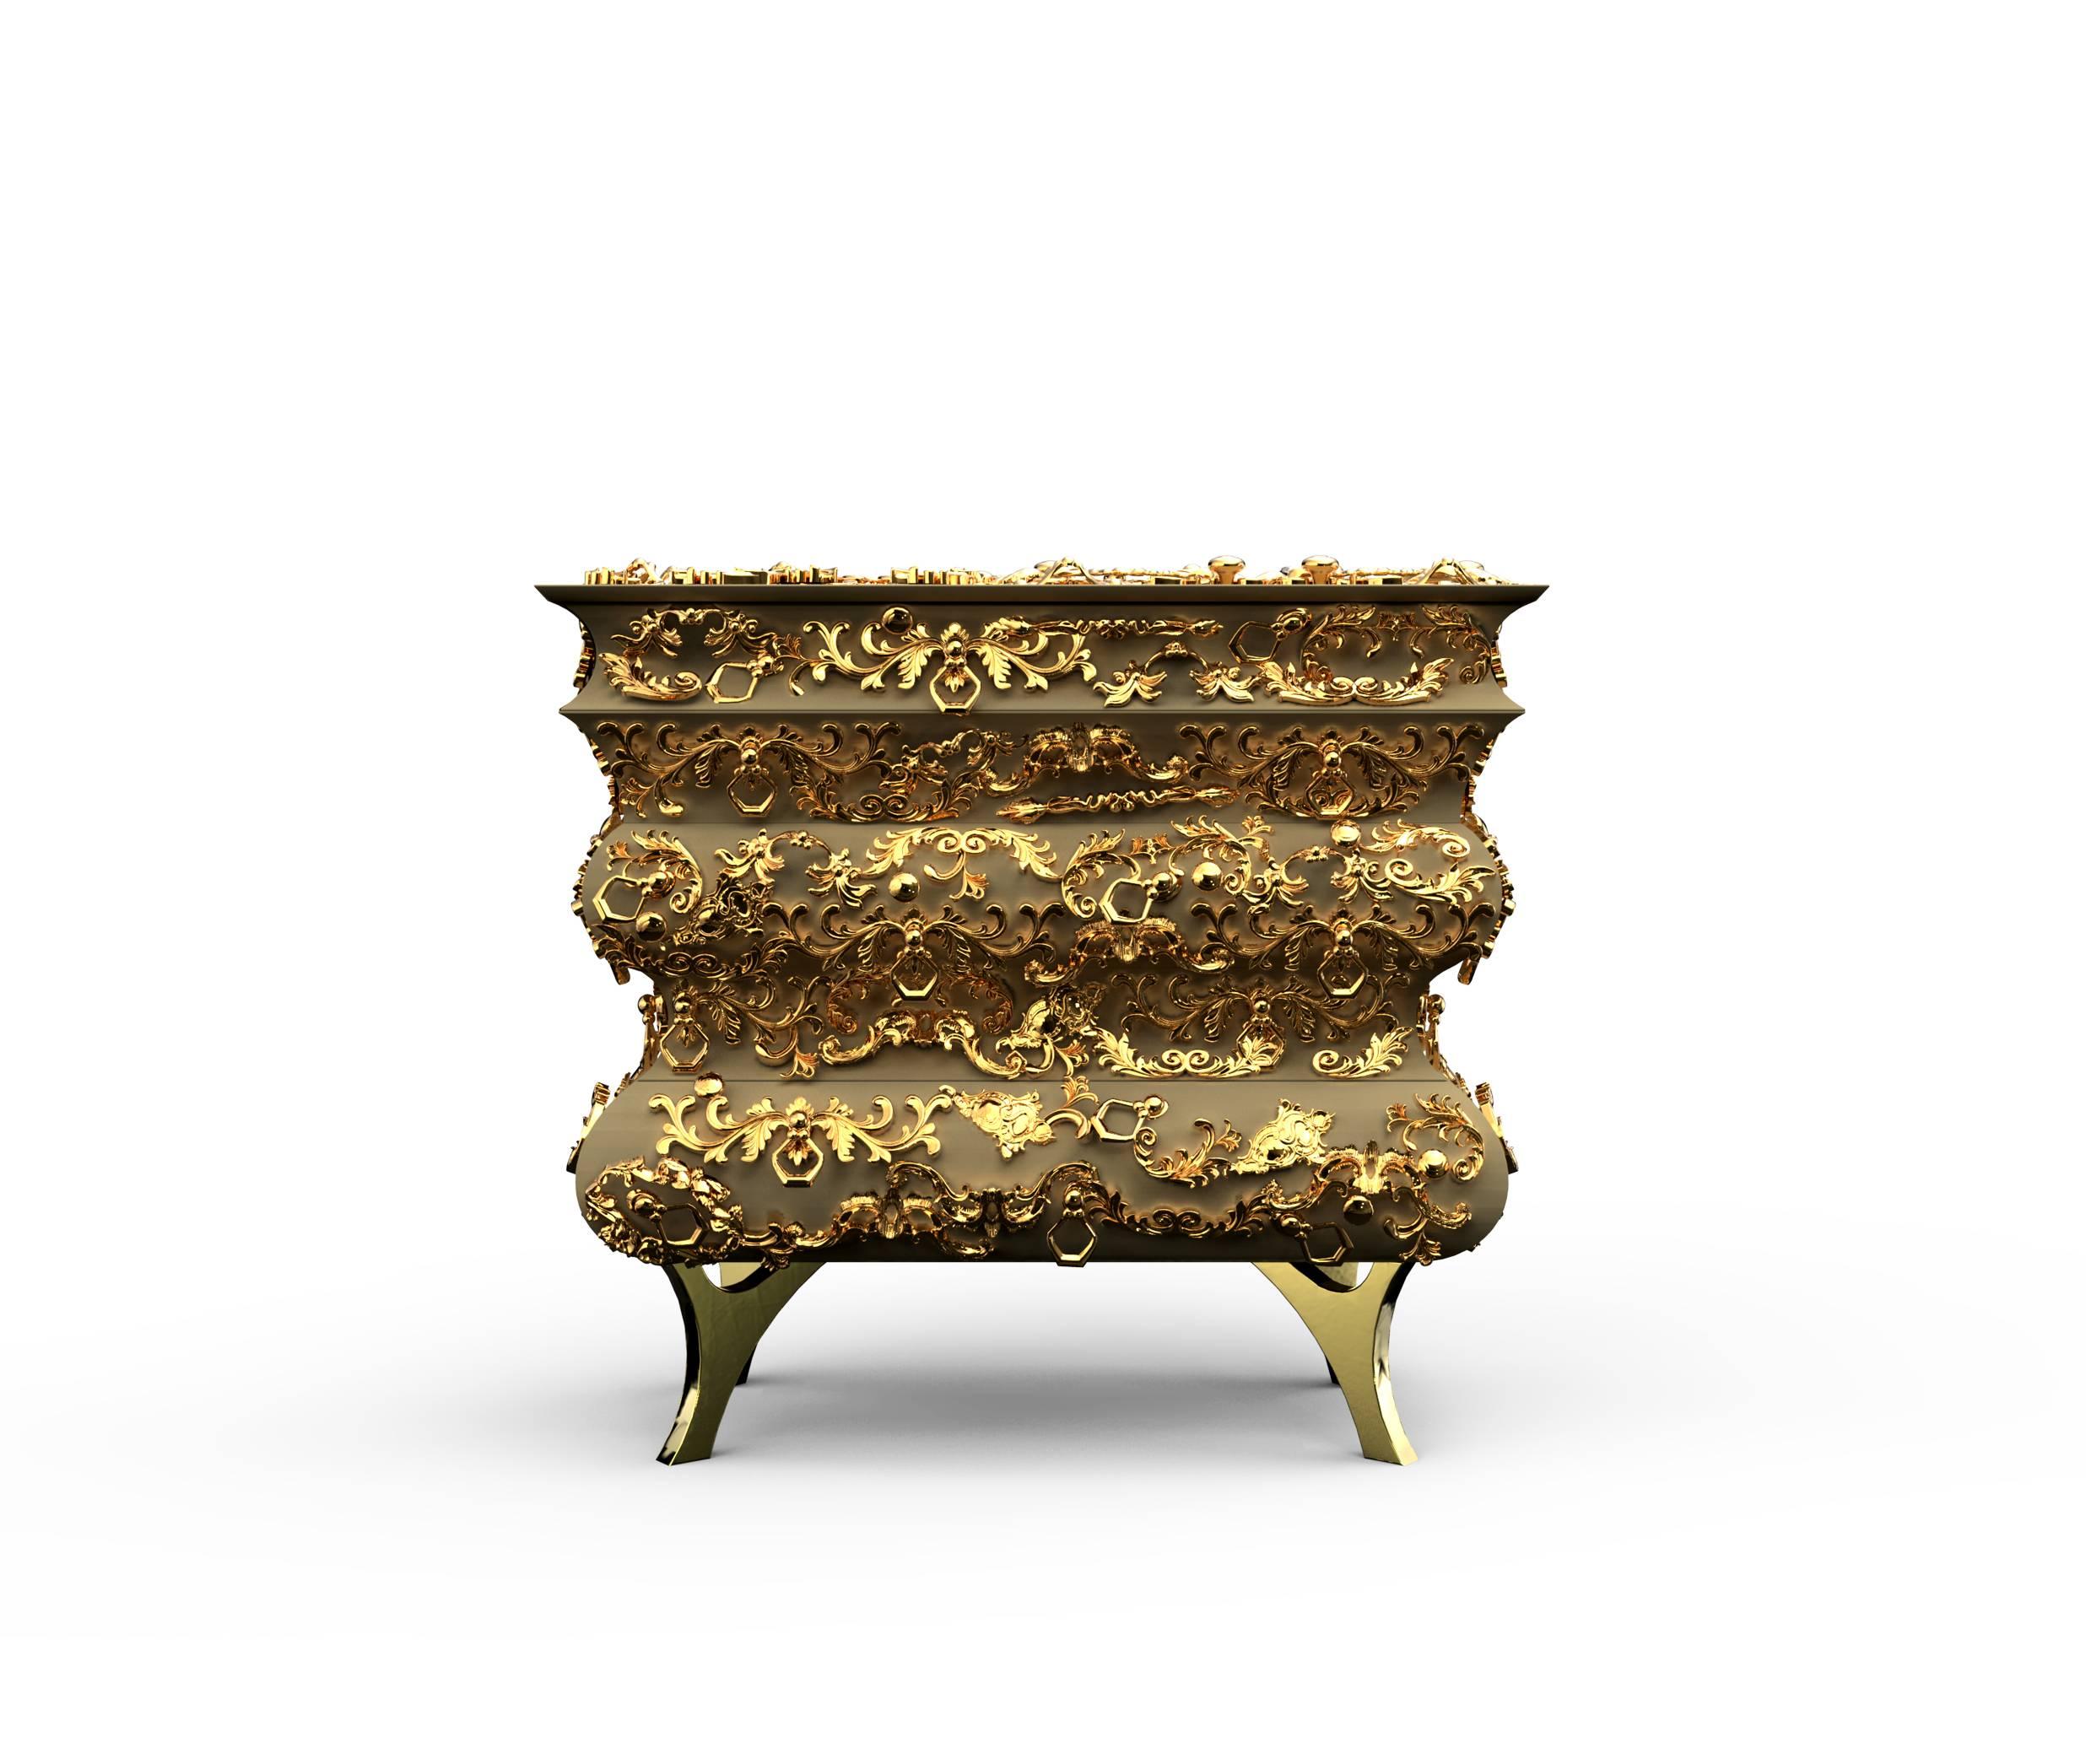 Timeless and classical nightstand inspired by an artisan method popular in Europe during the 19th century. It is made in wood and finished with a golden leaf with translucent beige/high gloss varnish. It is then covered in a beautiful intricate